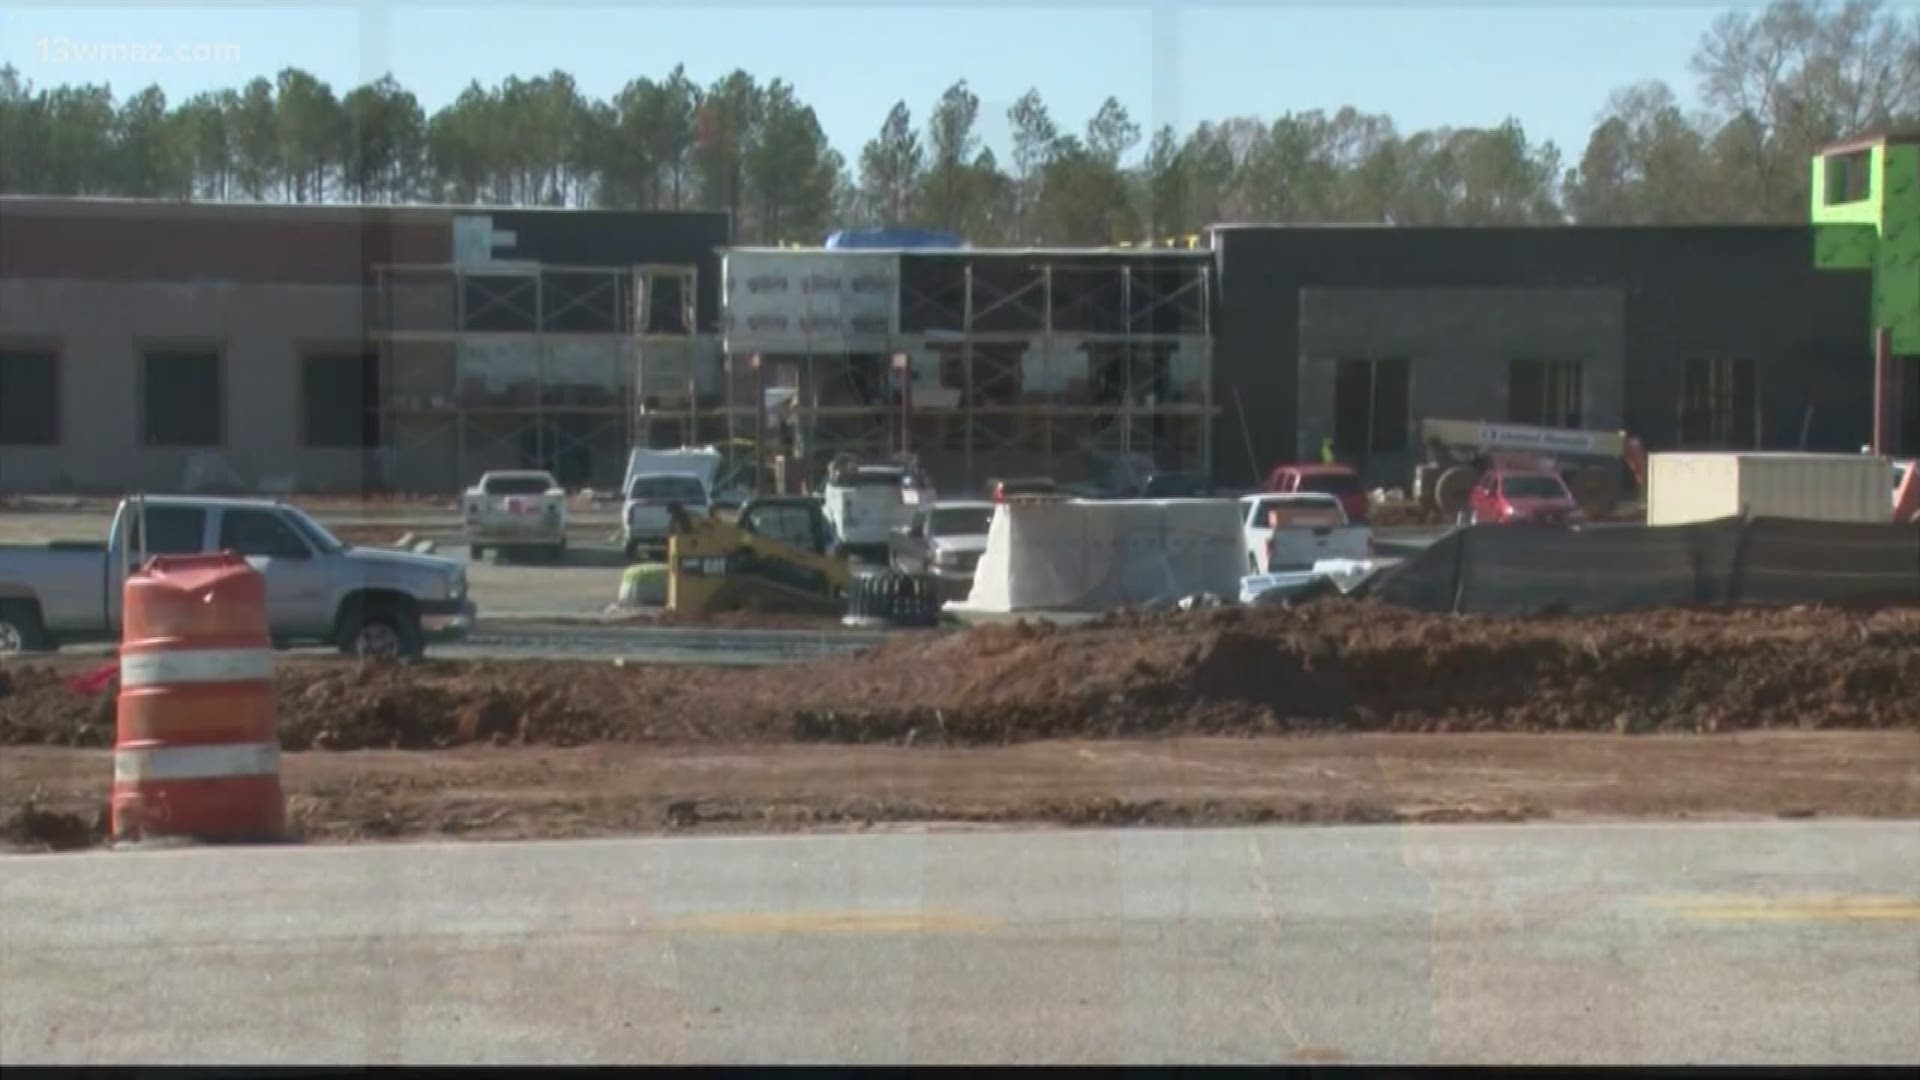 Houston County school leaders say their new Bonaire Primary School will better serve the area's fast-growing population.